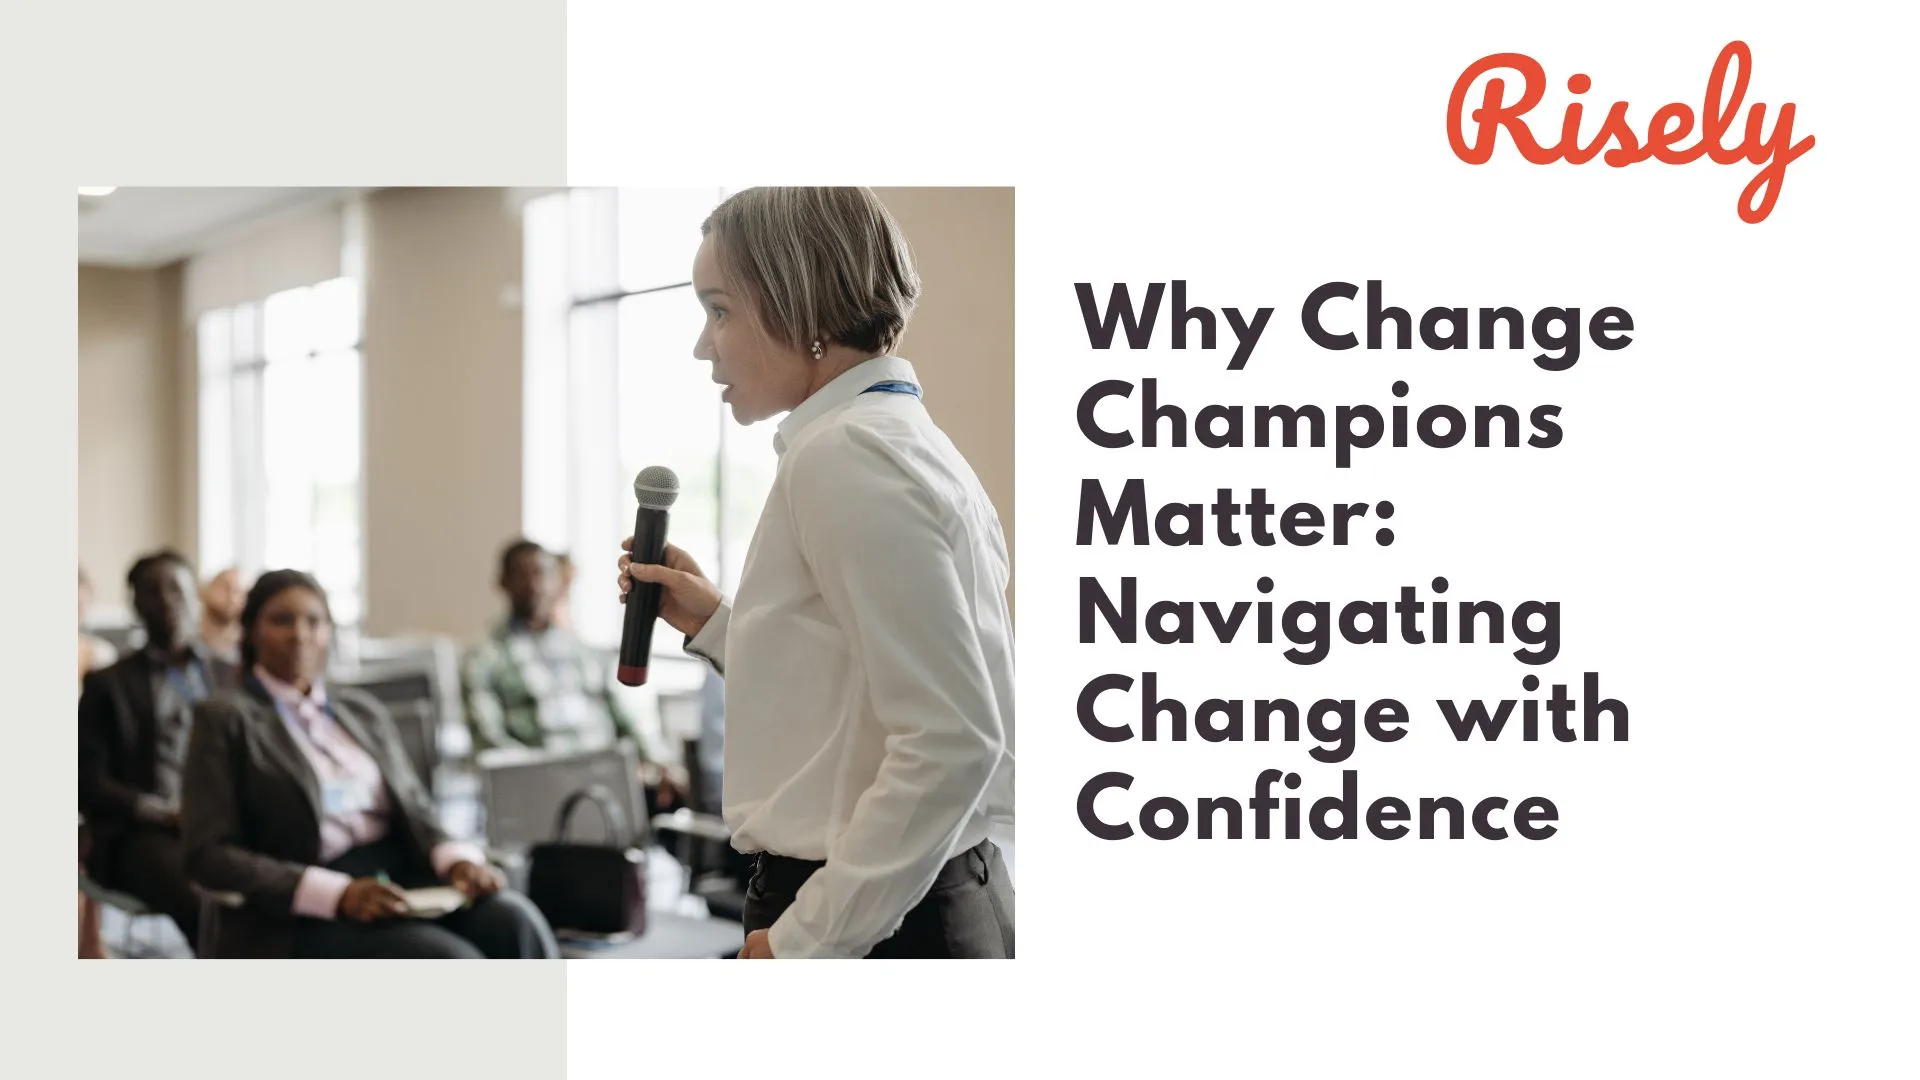 Why Change Champions Matter: Navigating Change with Confidence